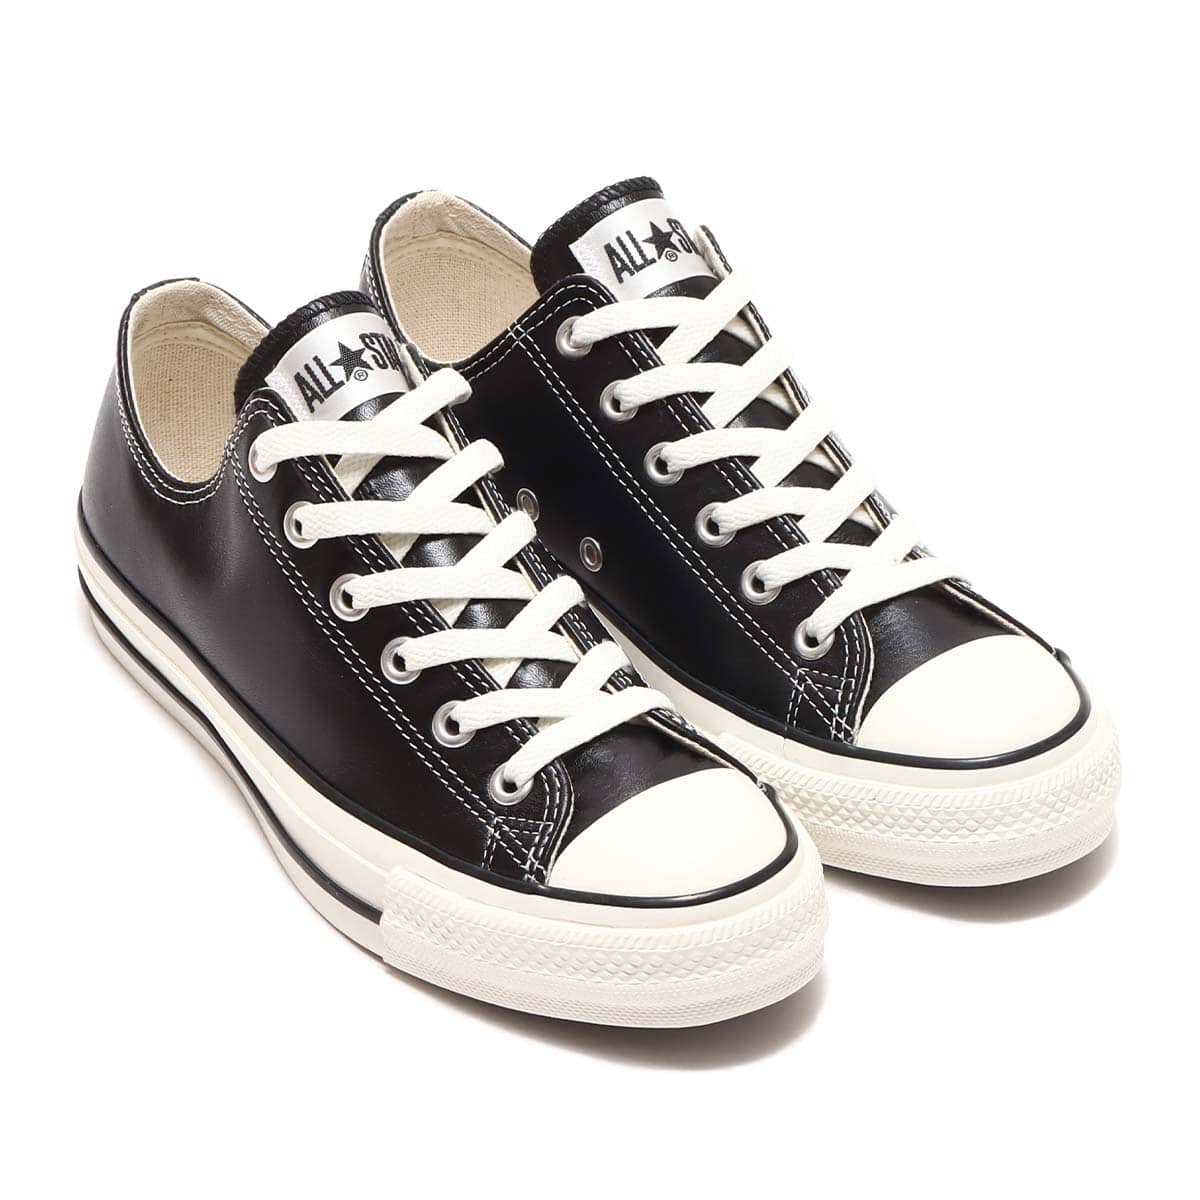 CONVERSE AS (R) OLIVE GREEN LEATHER OX BLACK